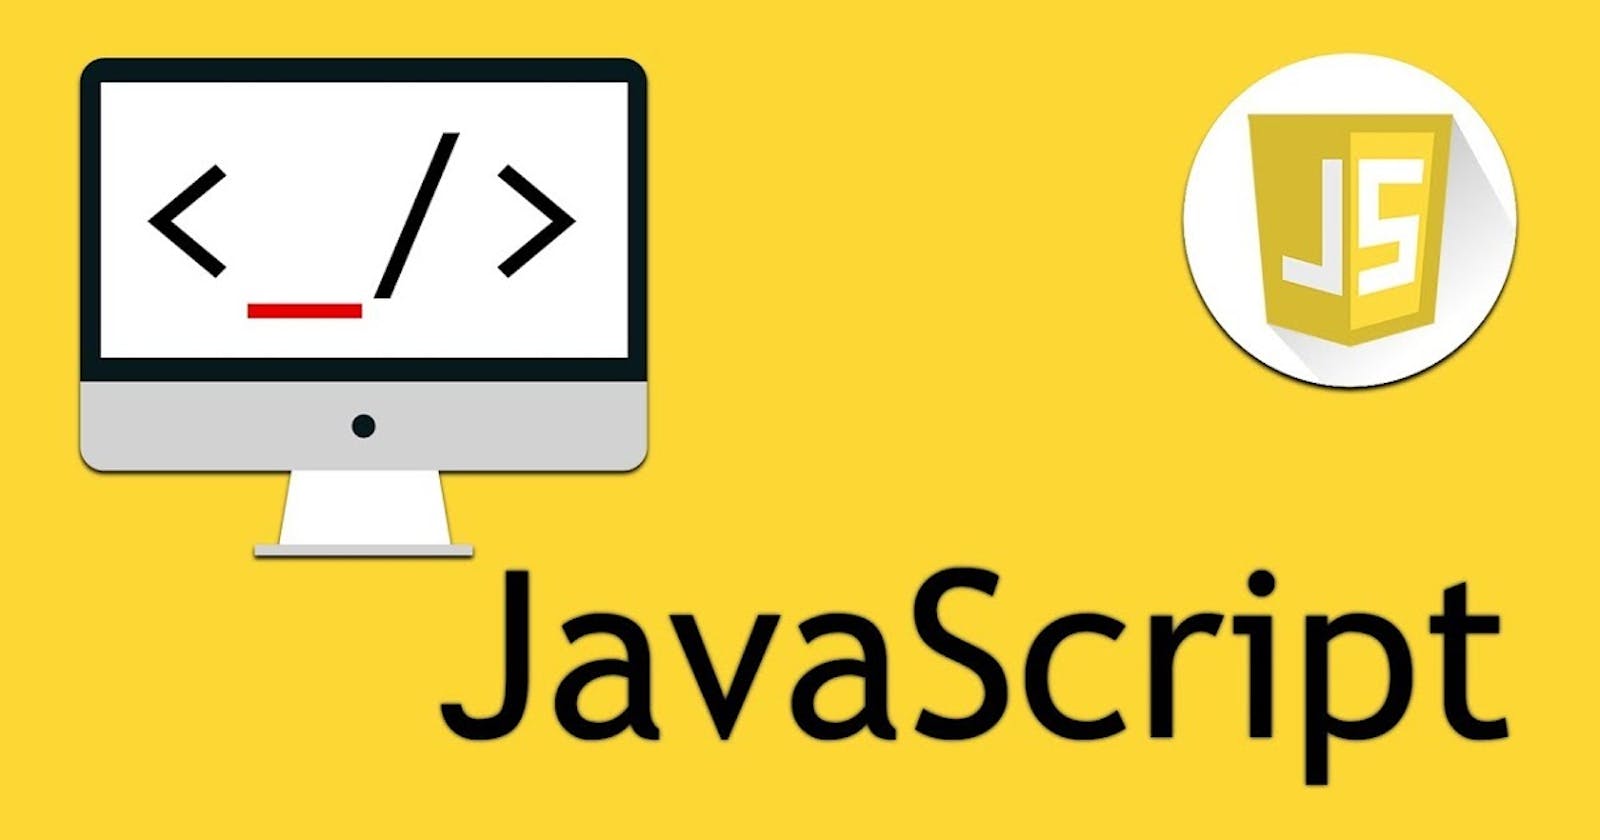 Array functions that you would need to know before that javascript technical interview.